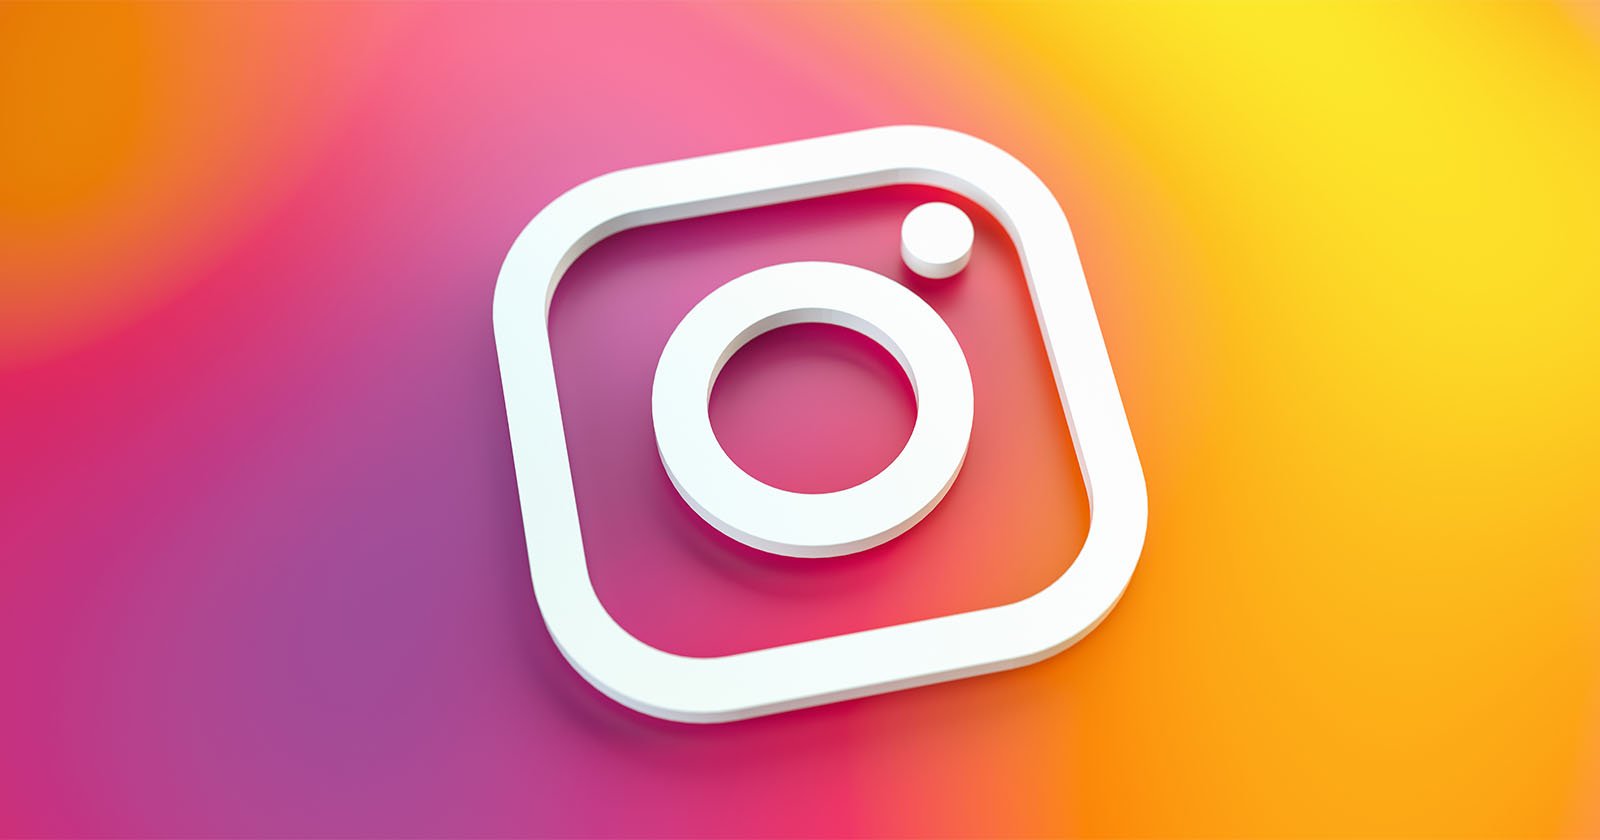 Instagram May Be Working on ‘Peek’ Feature to Rival BeReal